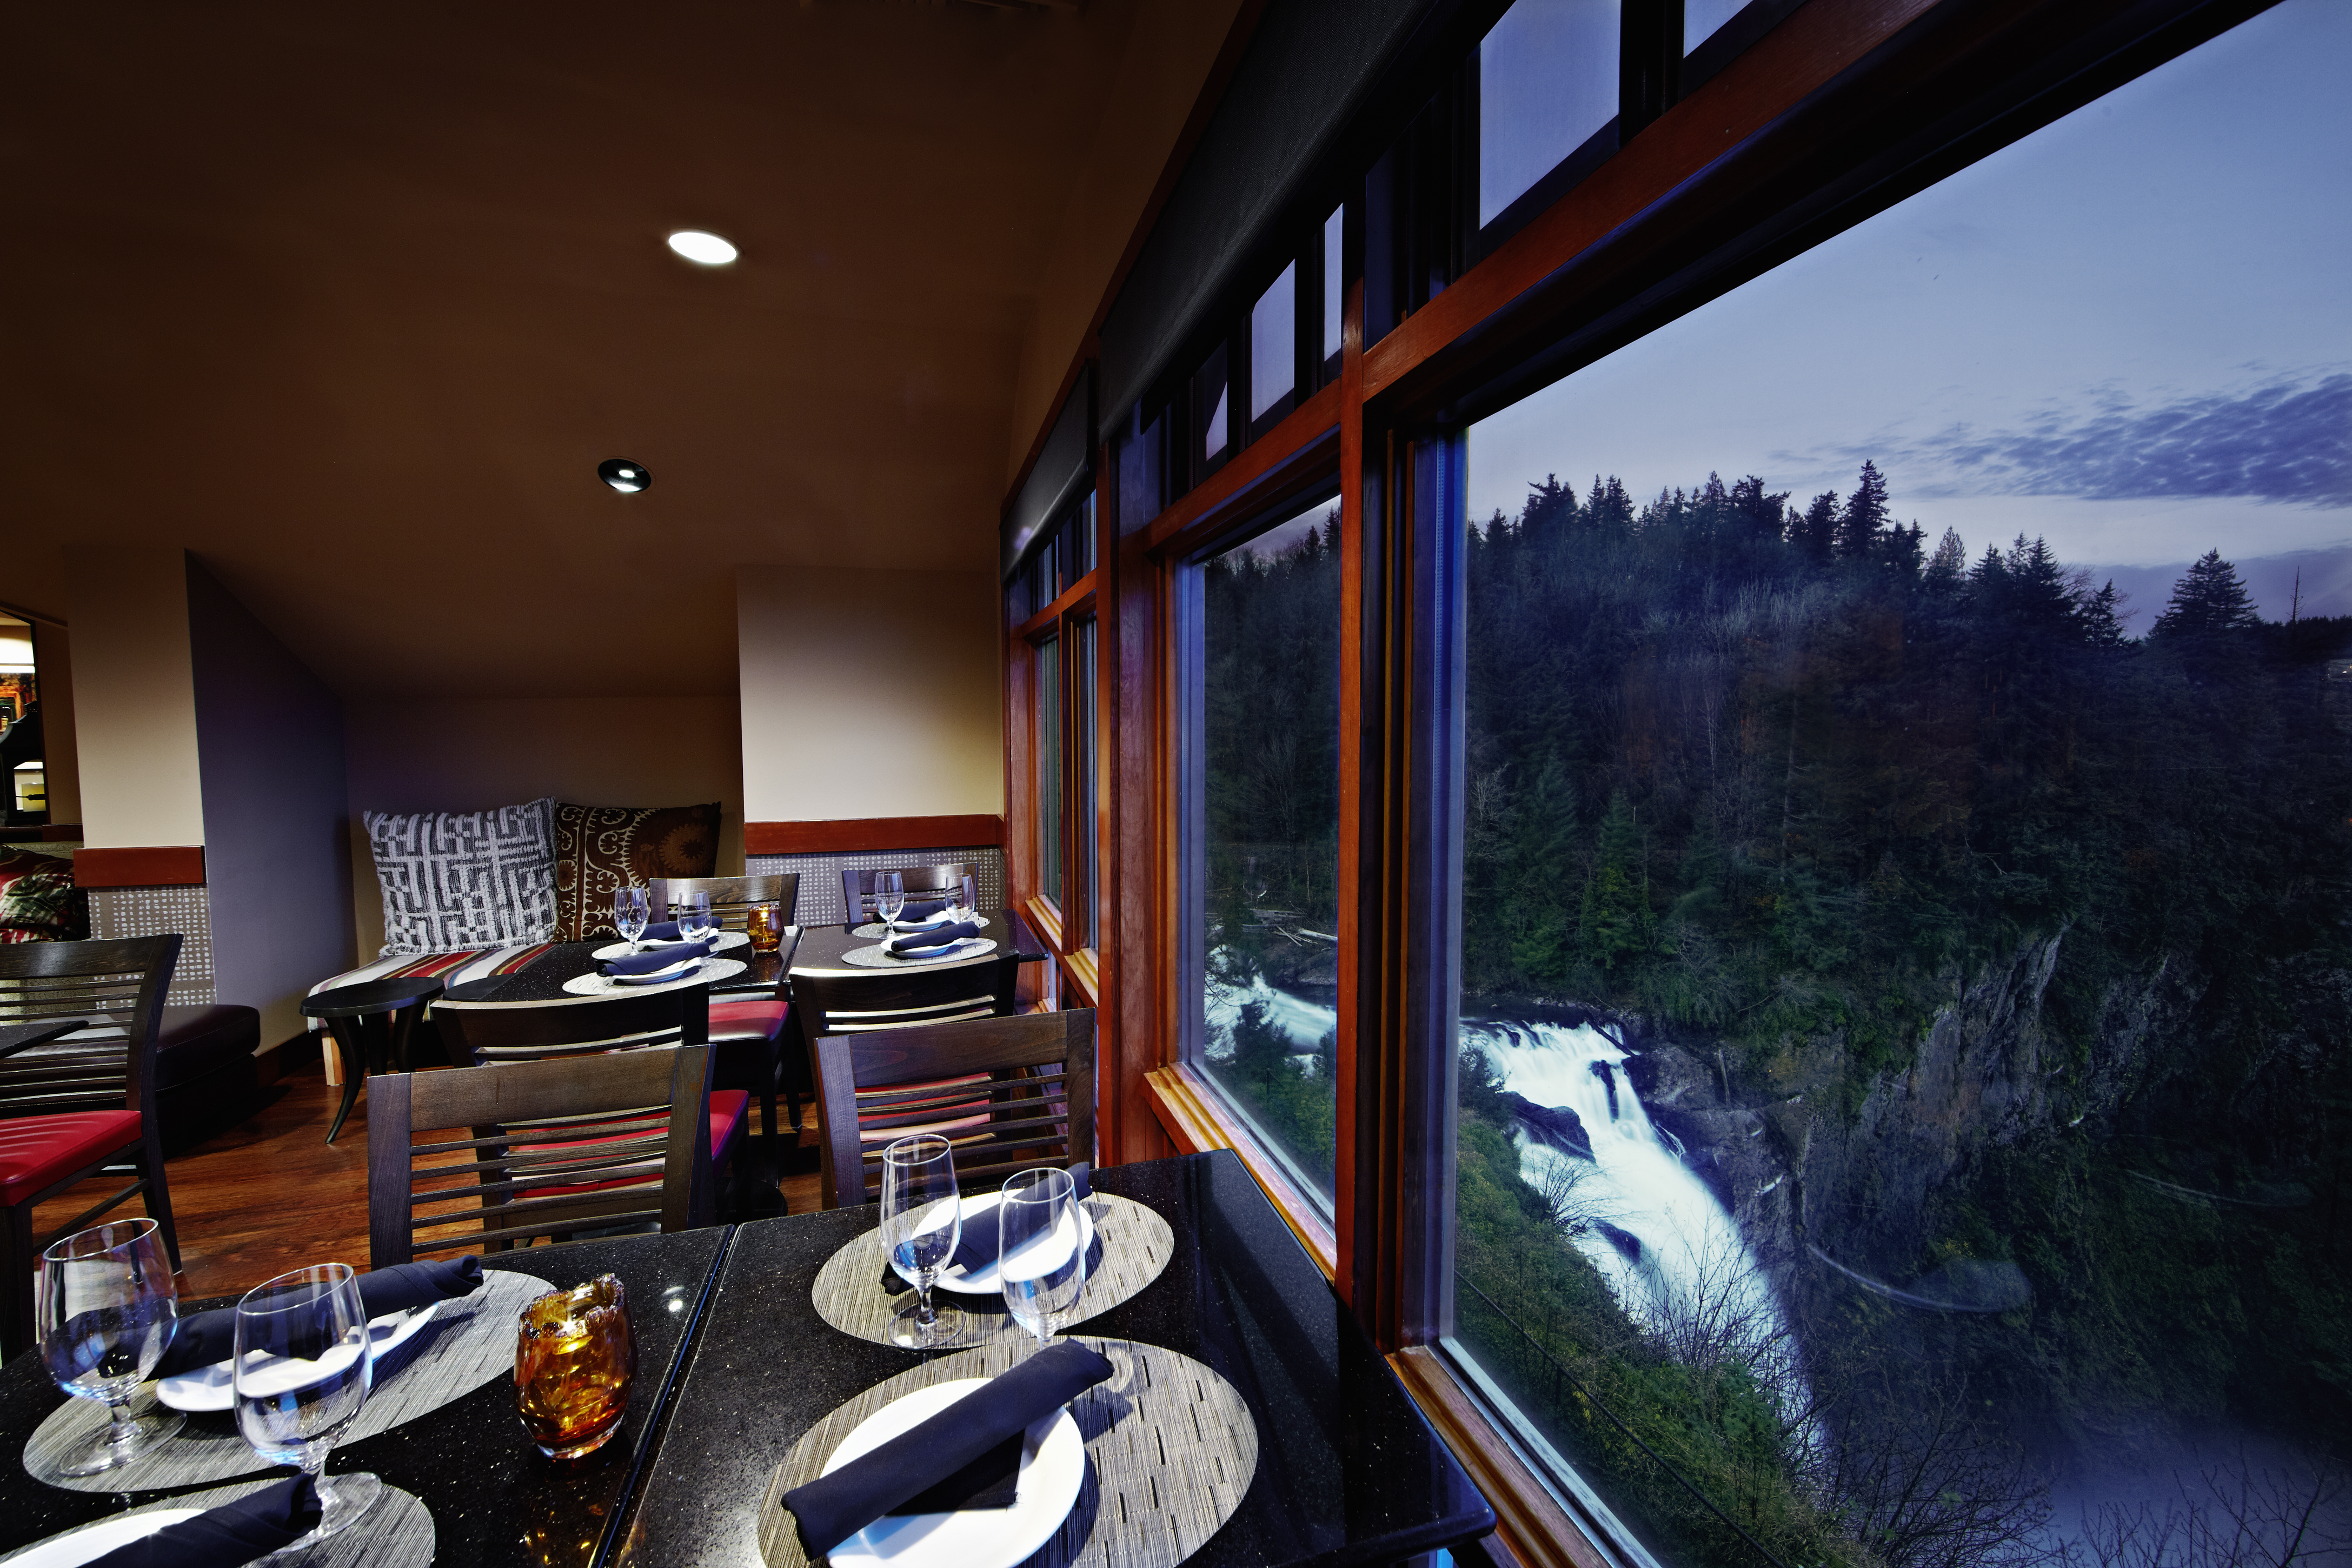 Tables are set with plates and cutlery. A waterfall can be seen through the large windows to the right. 